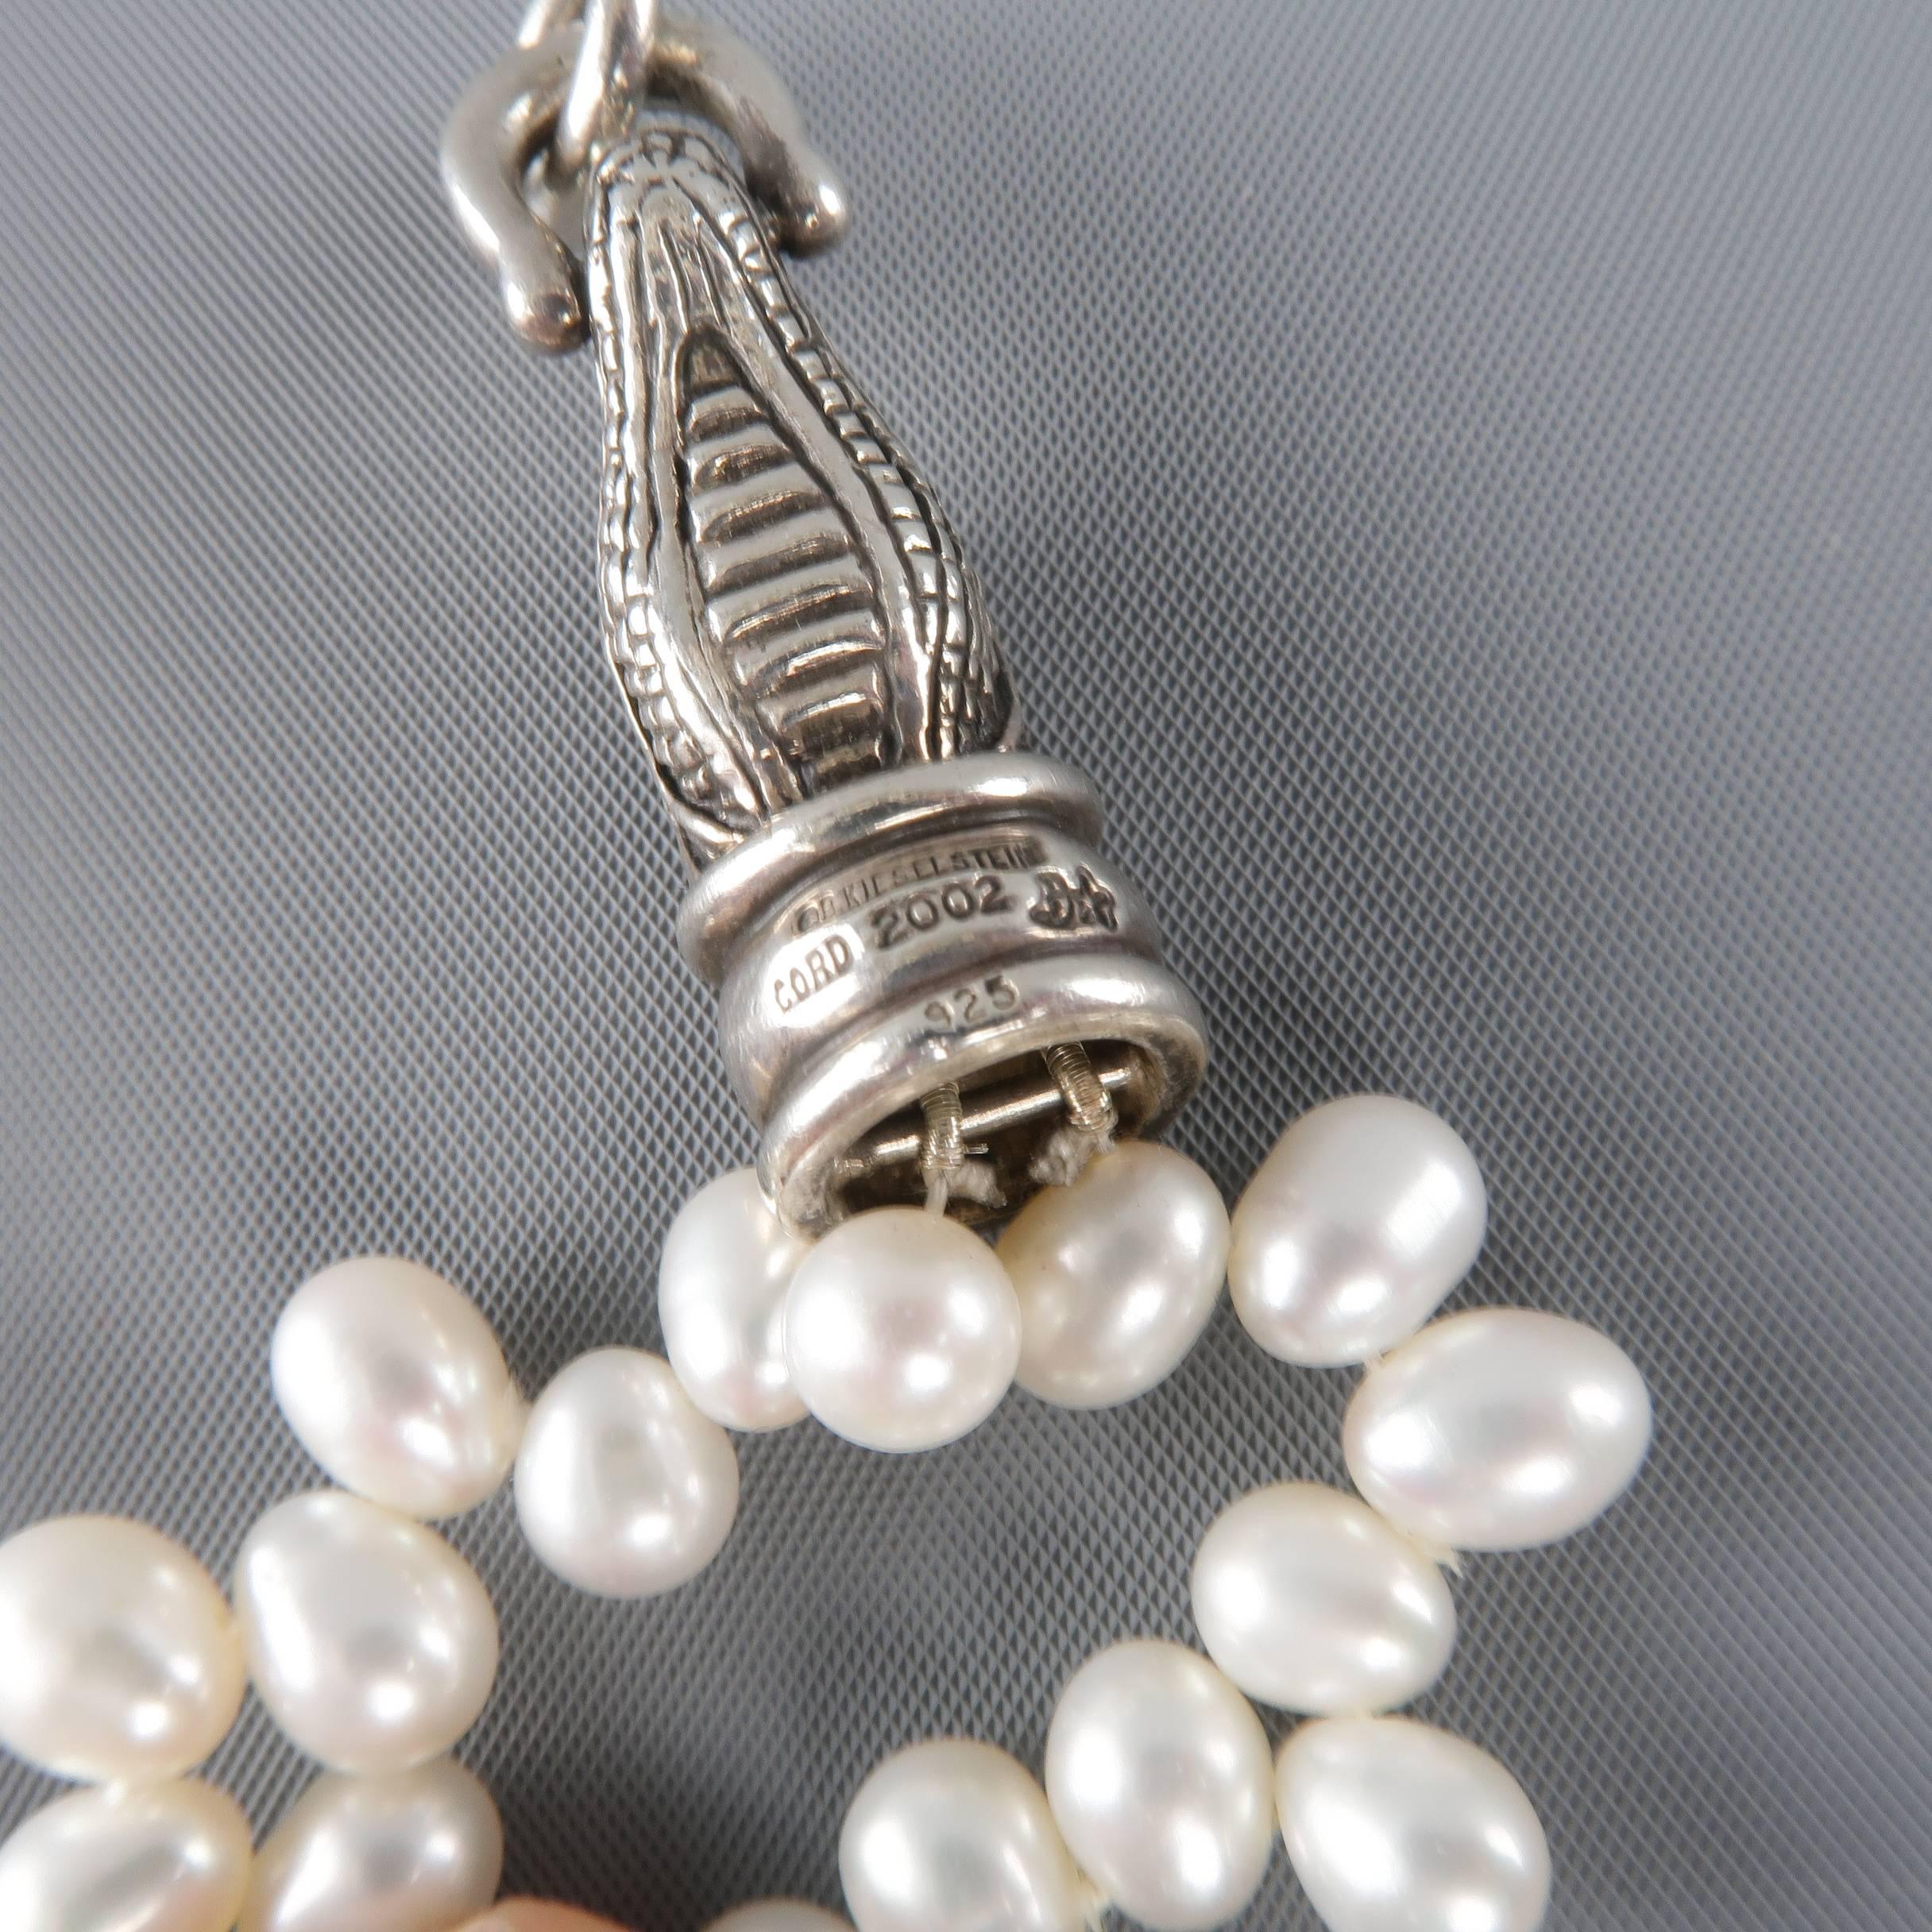 Kieselstein-Cord Bracelet Off White Pearls and Sterling Silver Alligator Clasp 3